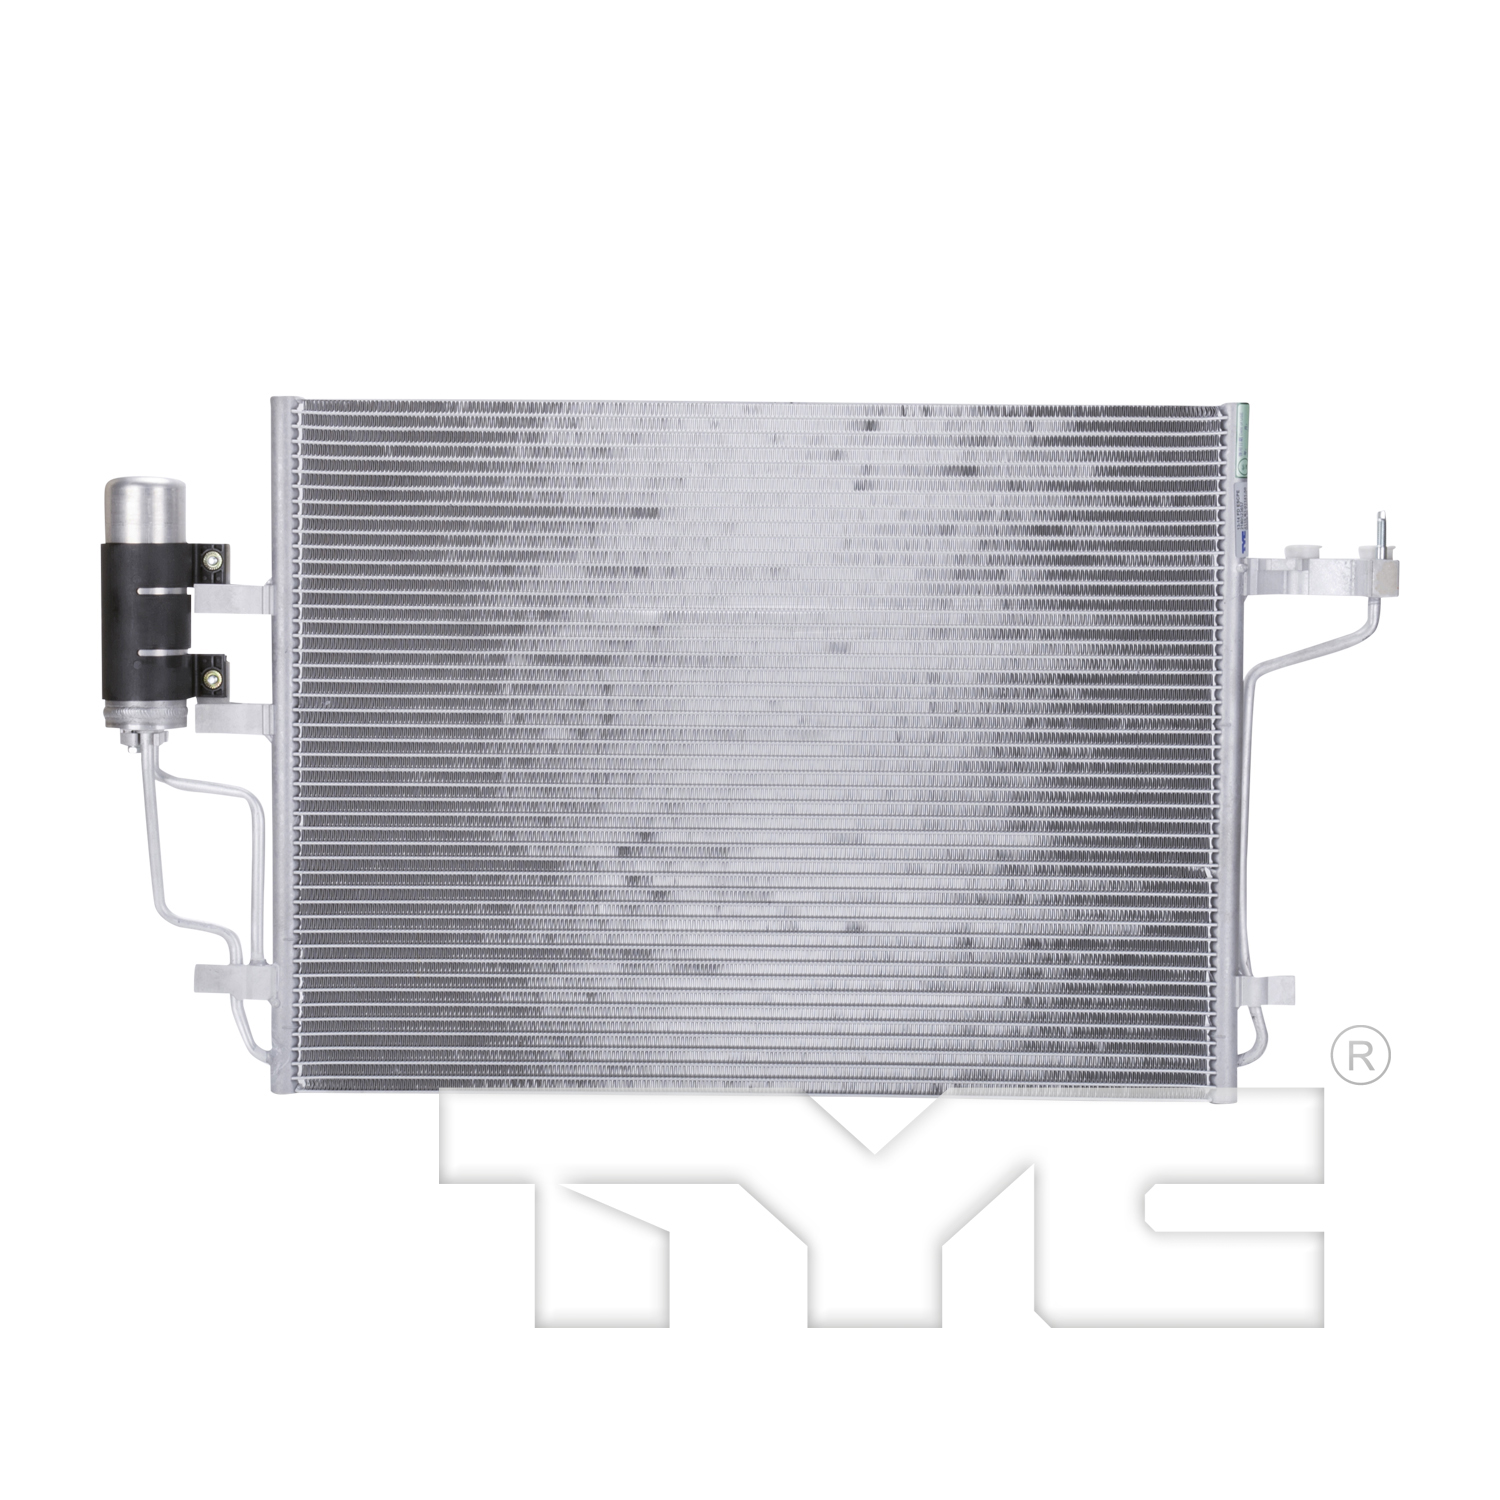 Aftermarket AC CONDENSERS for FORD - ESCAPE, ESCAPE,13-16,Air conditioning condenser